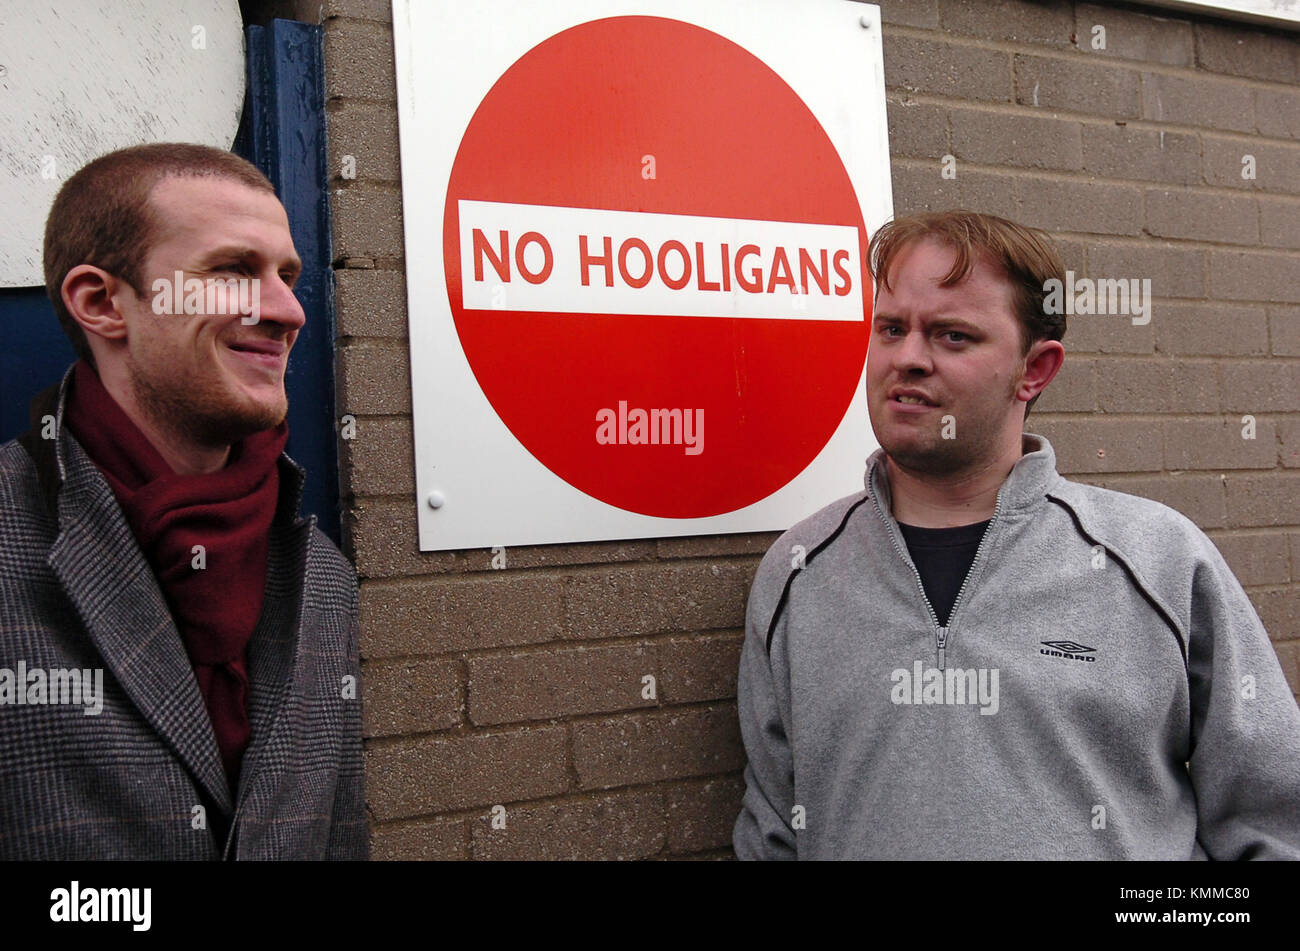 Sports journalist chatting next to 'No Hooligans' sign banning hooligans from Cardiff City Football Club Stock Photo